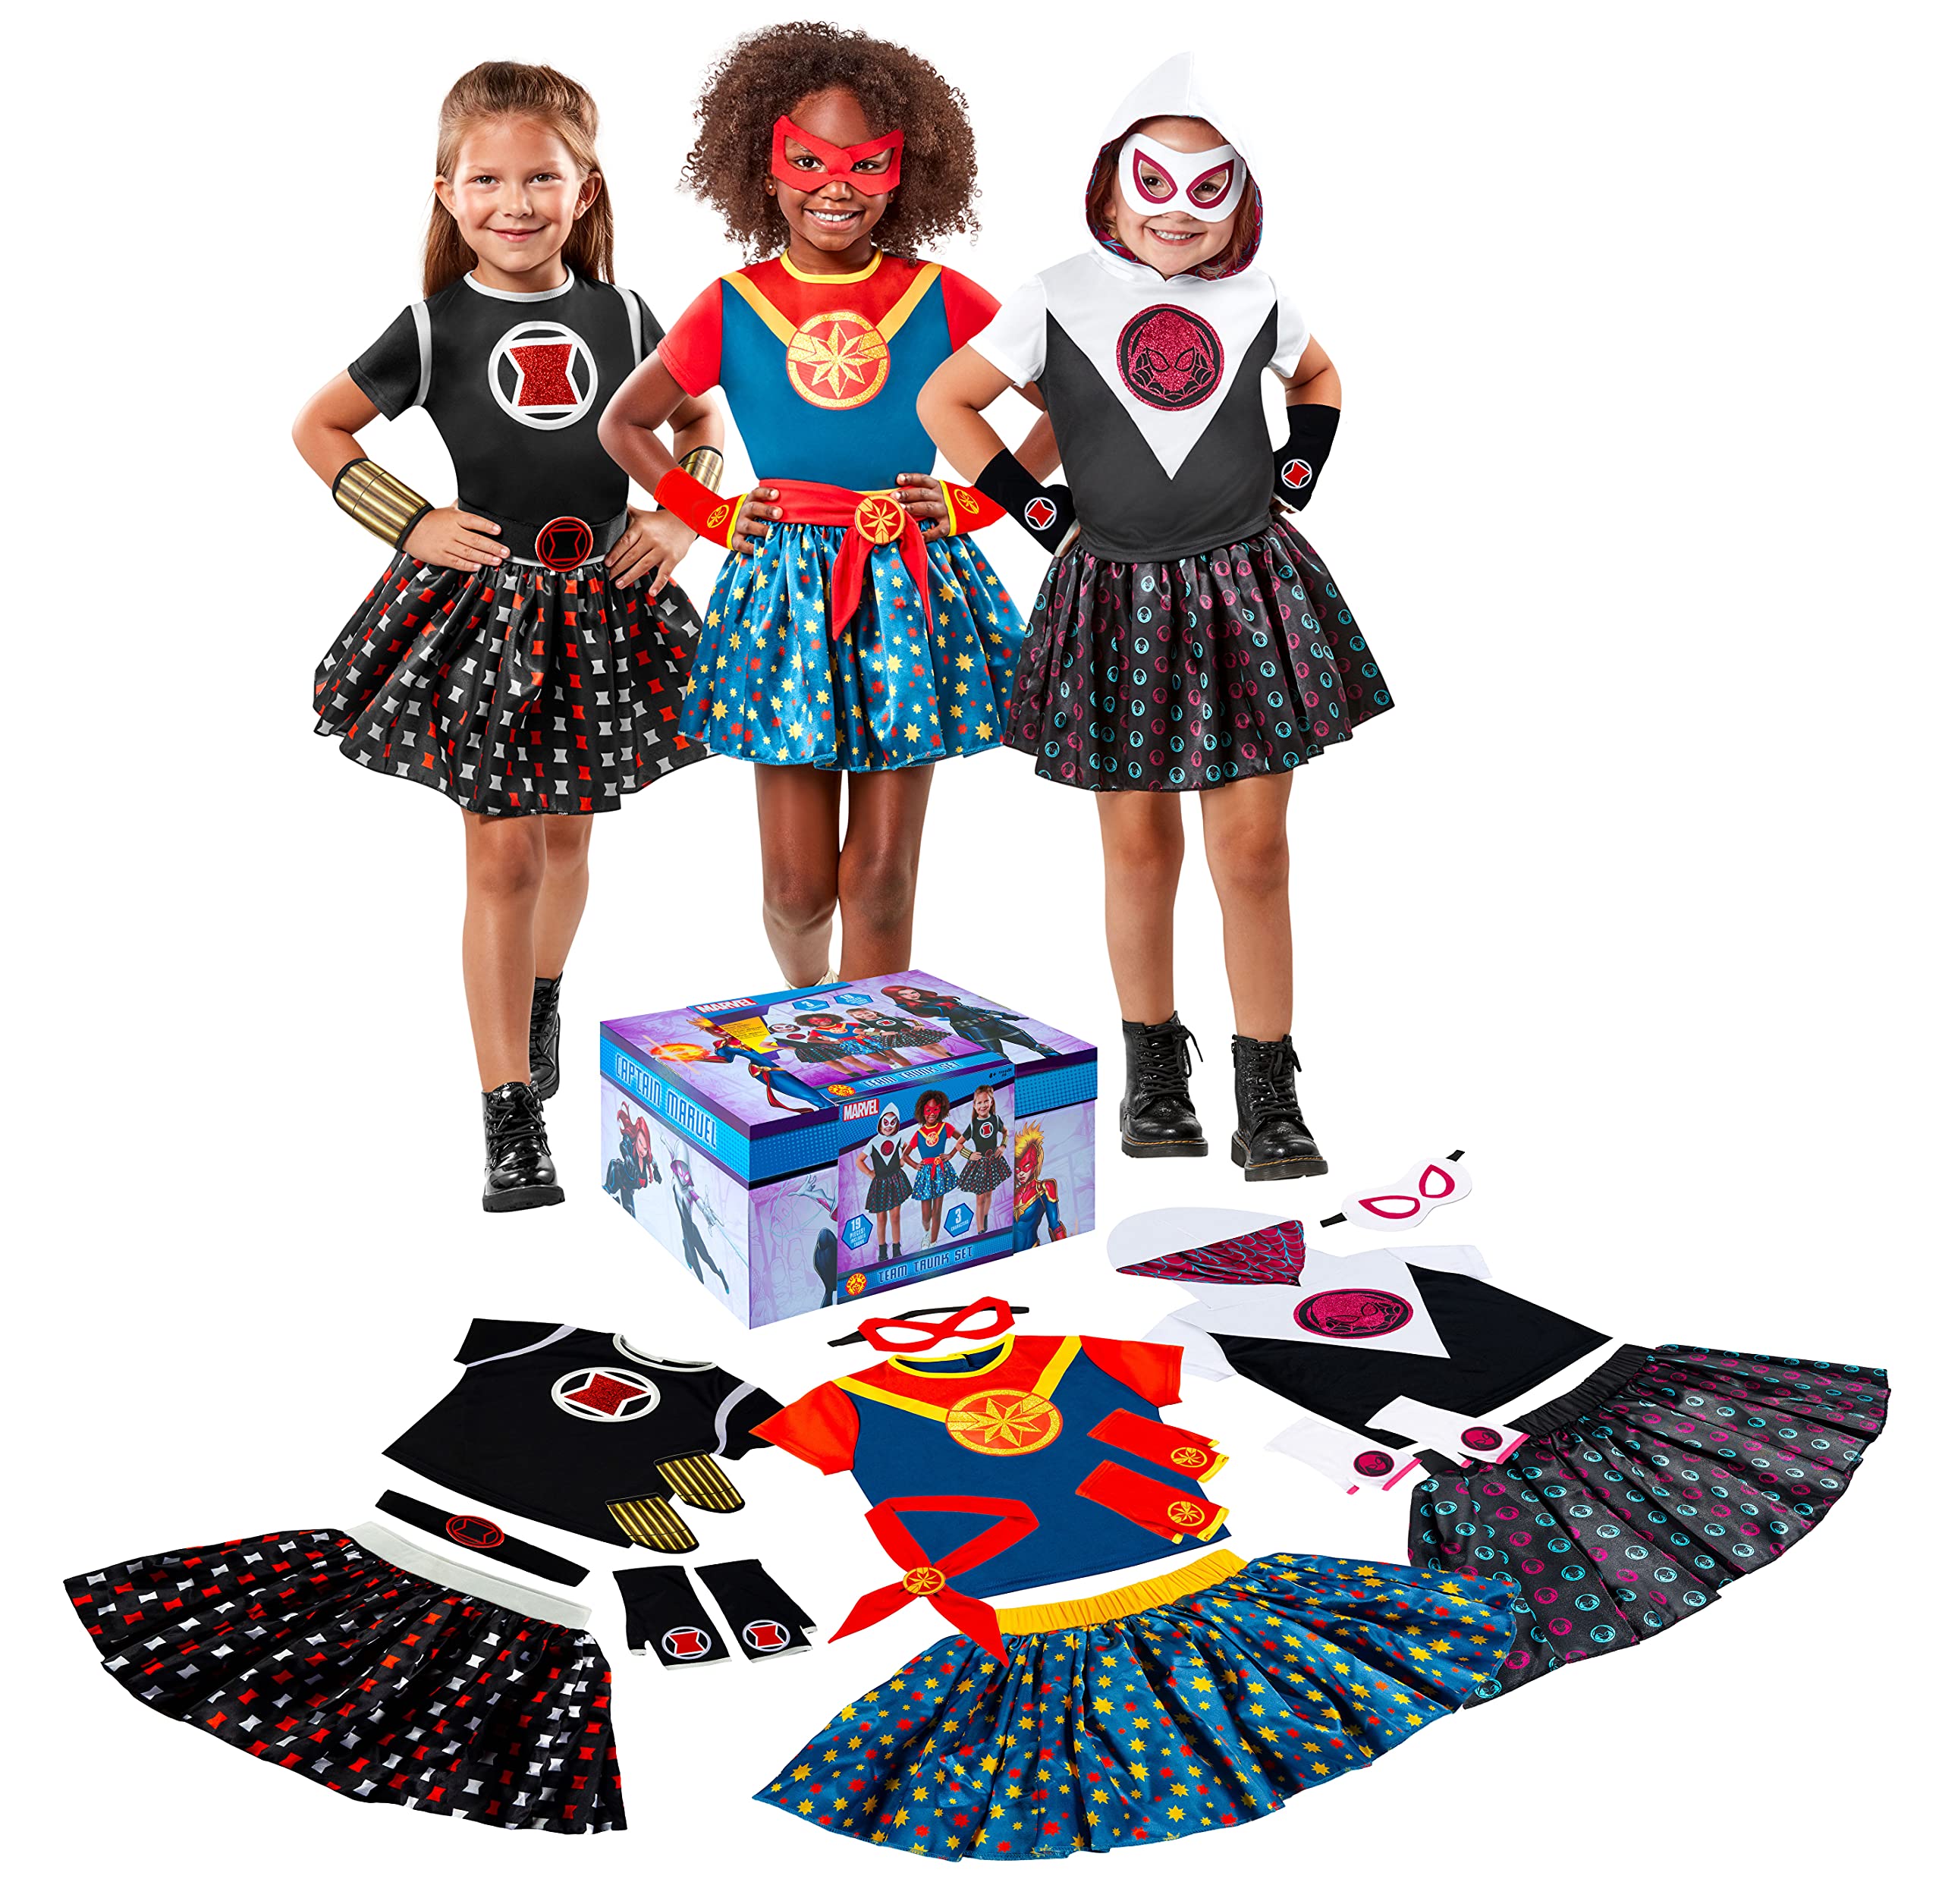 Rubie's Marvel Girl's Trunk Set (Captain Marvel, Ghost Spider, Black Widow), Small